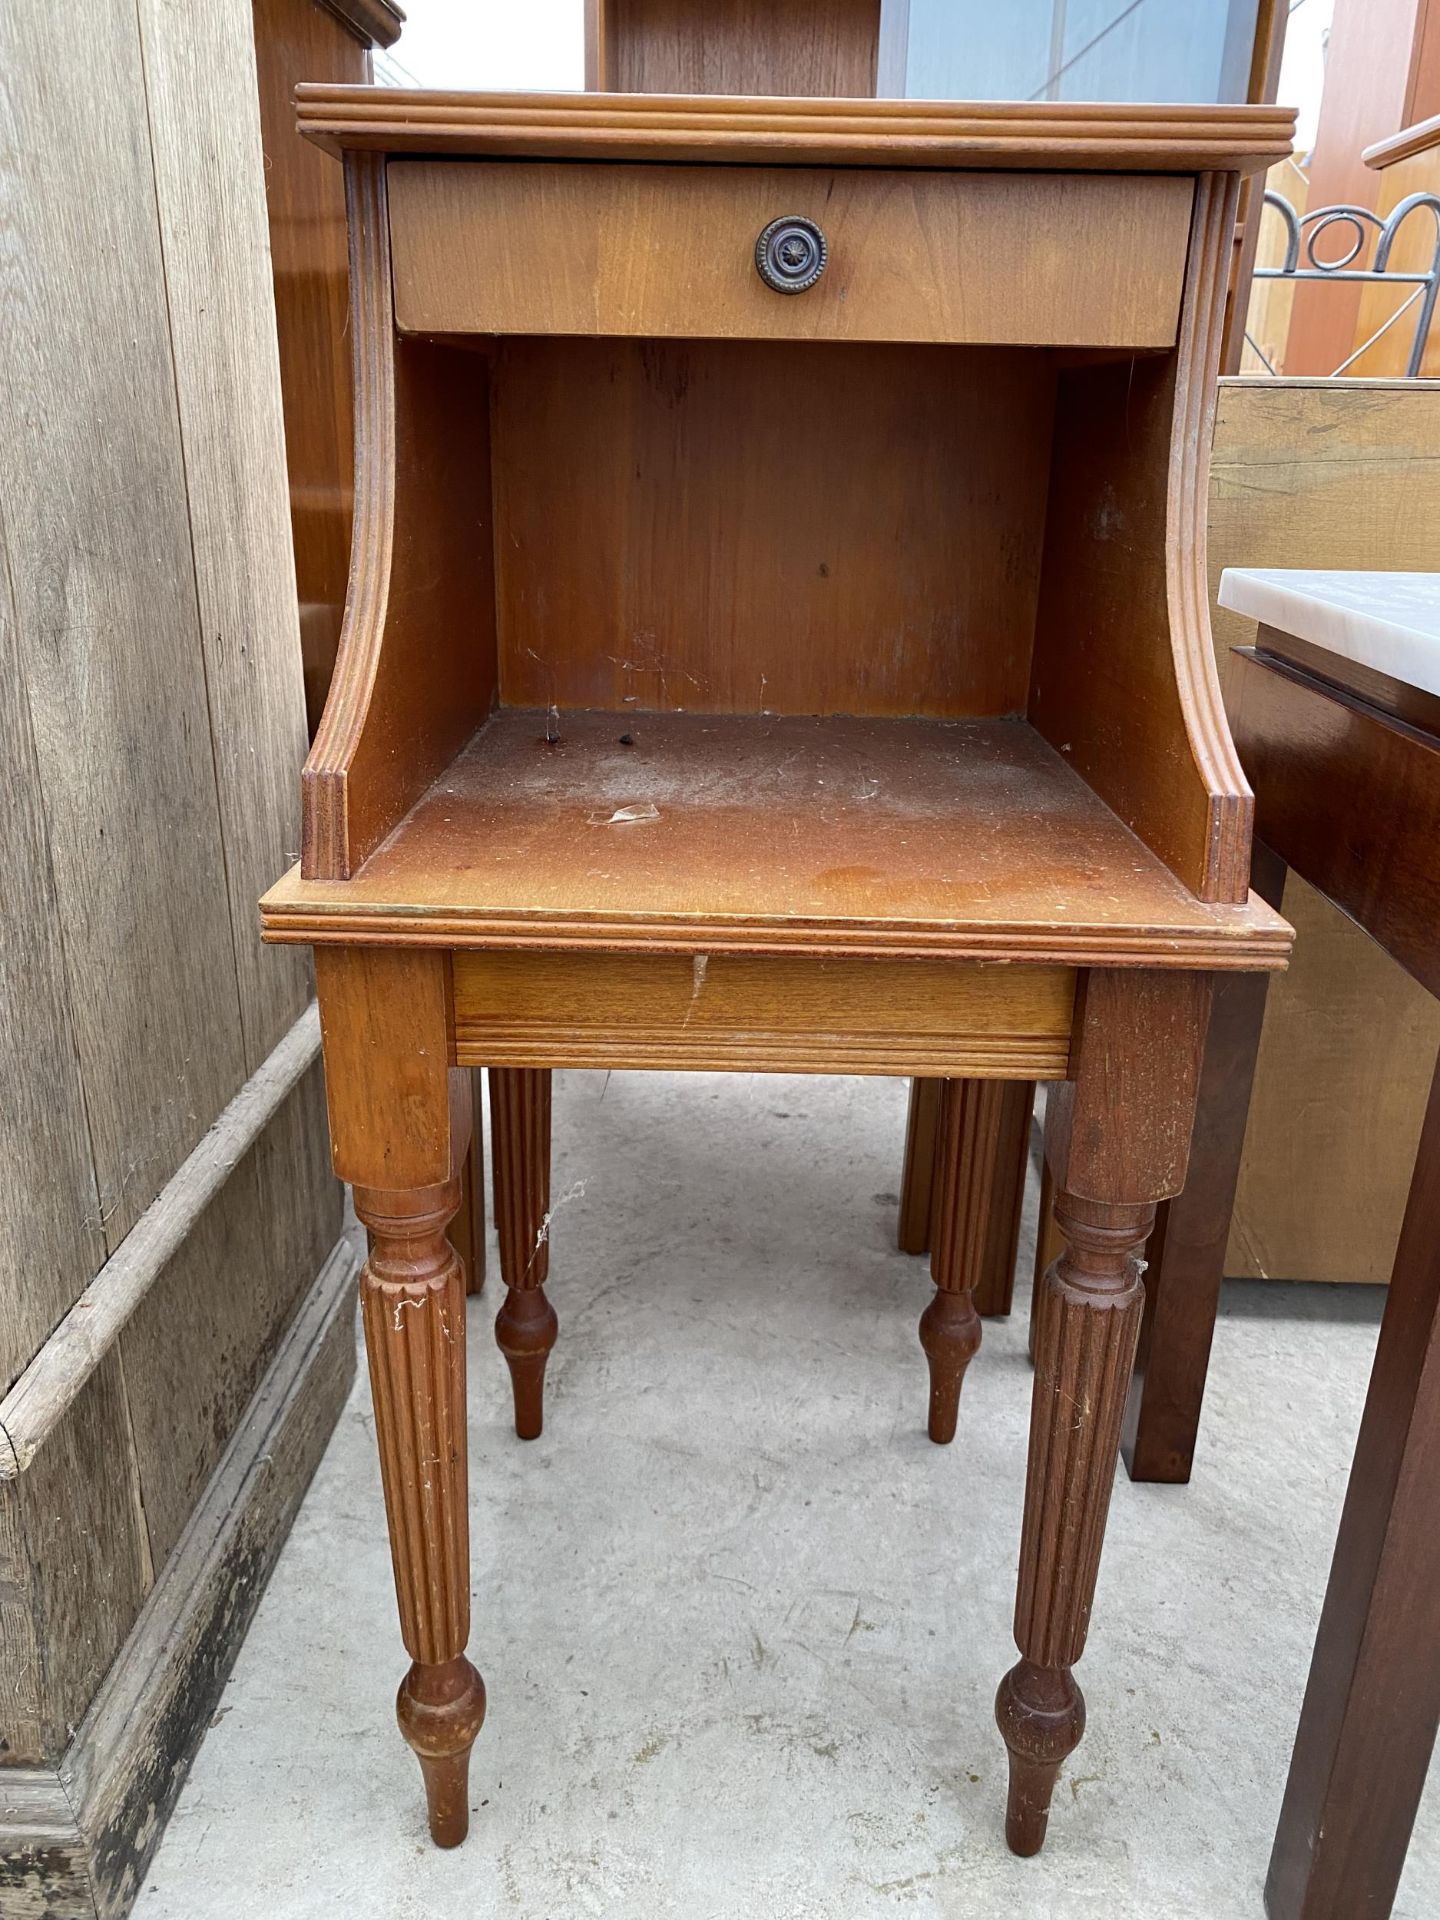 A MODERN YEW WOOD TELEPHONE TABLE WITH INSET LEATHER TOP, 14" WIDE - Image 2 of 4